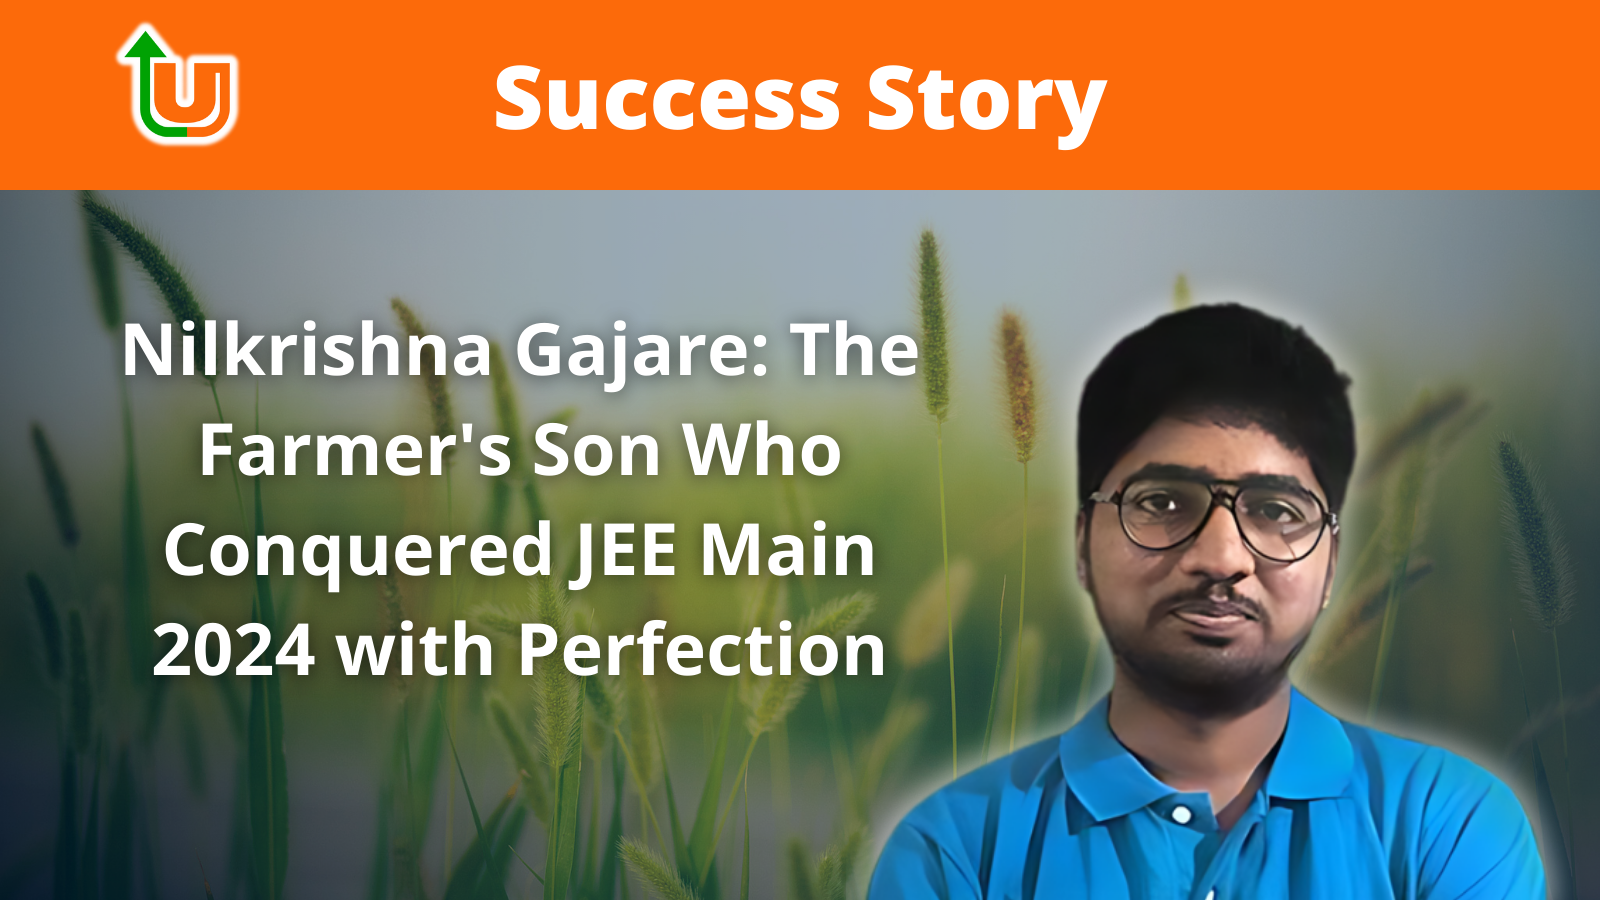 Nilkrishna Gajare: The Farmer's Son Who Conquered JEE Main 2024 with Perfection